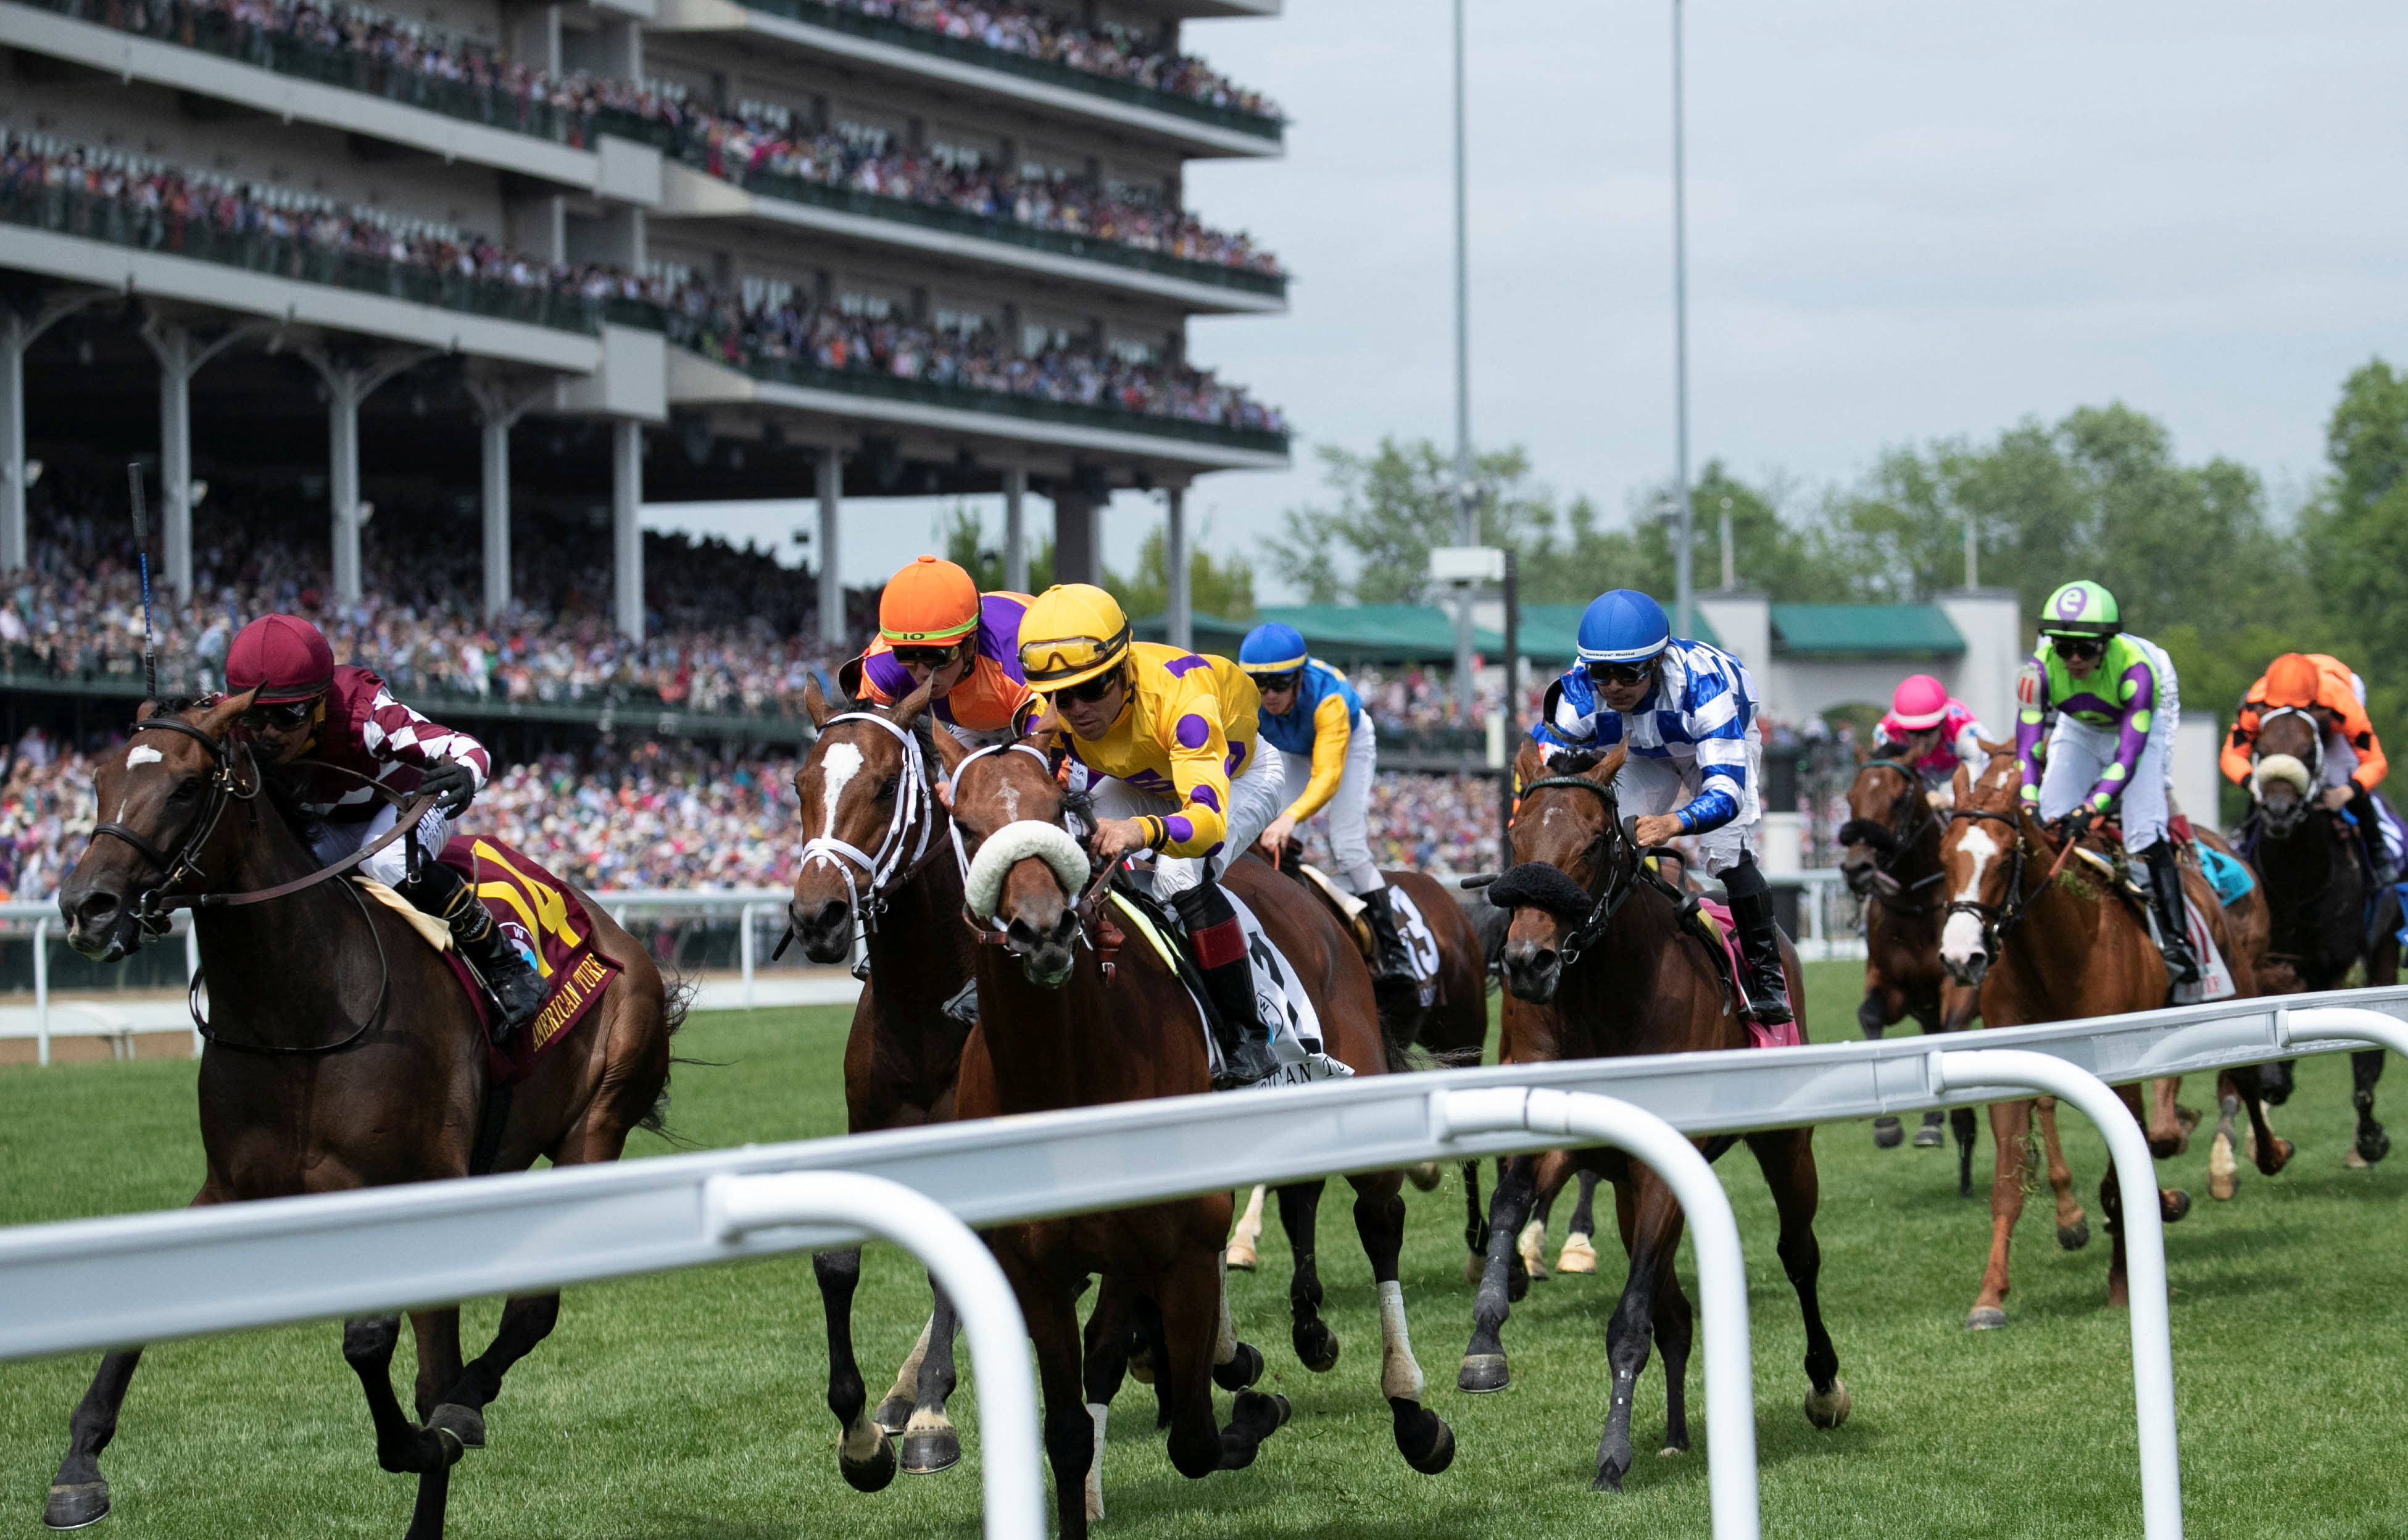 Mage wins Kentucky Derby, seven horse deaths being investigated at